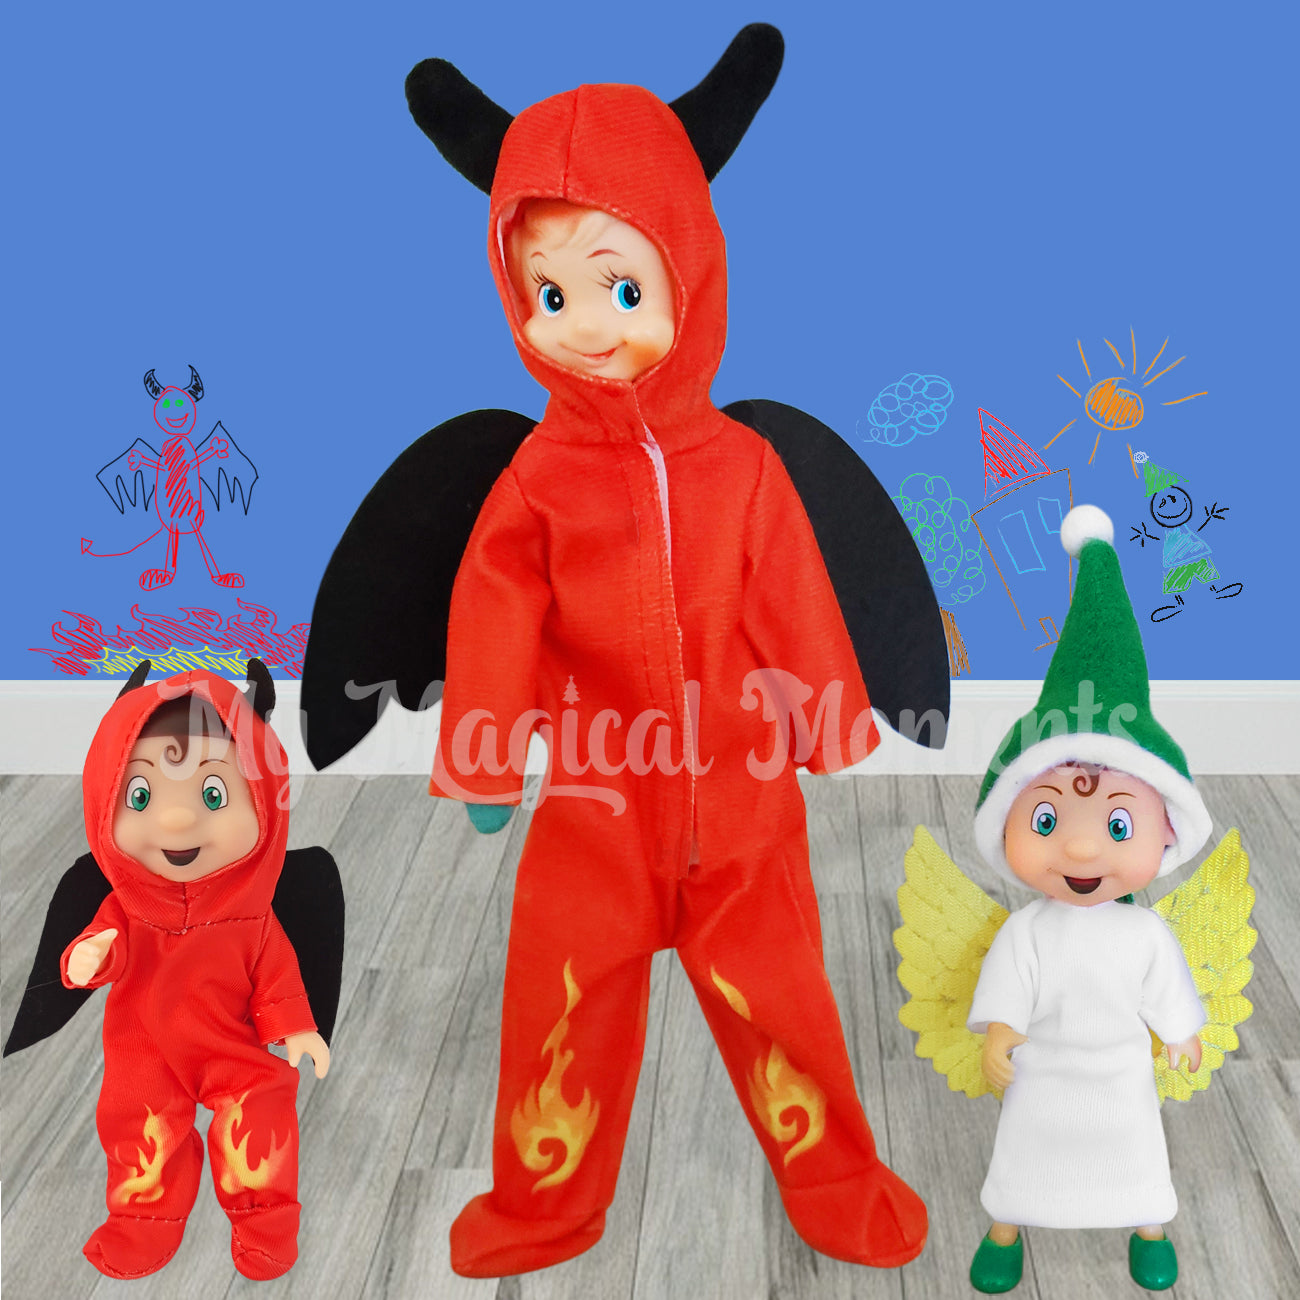 Devil Costume with Elf Toddler Devil & Angel outfits By My Magical Moments